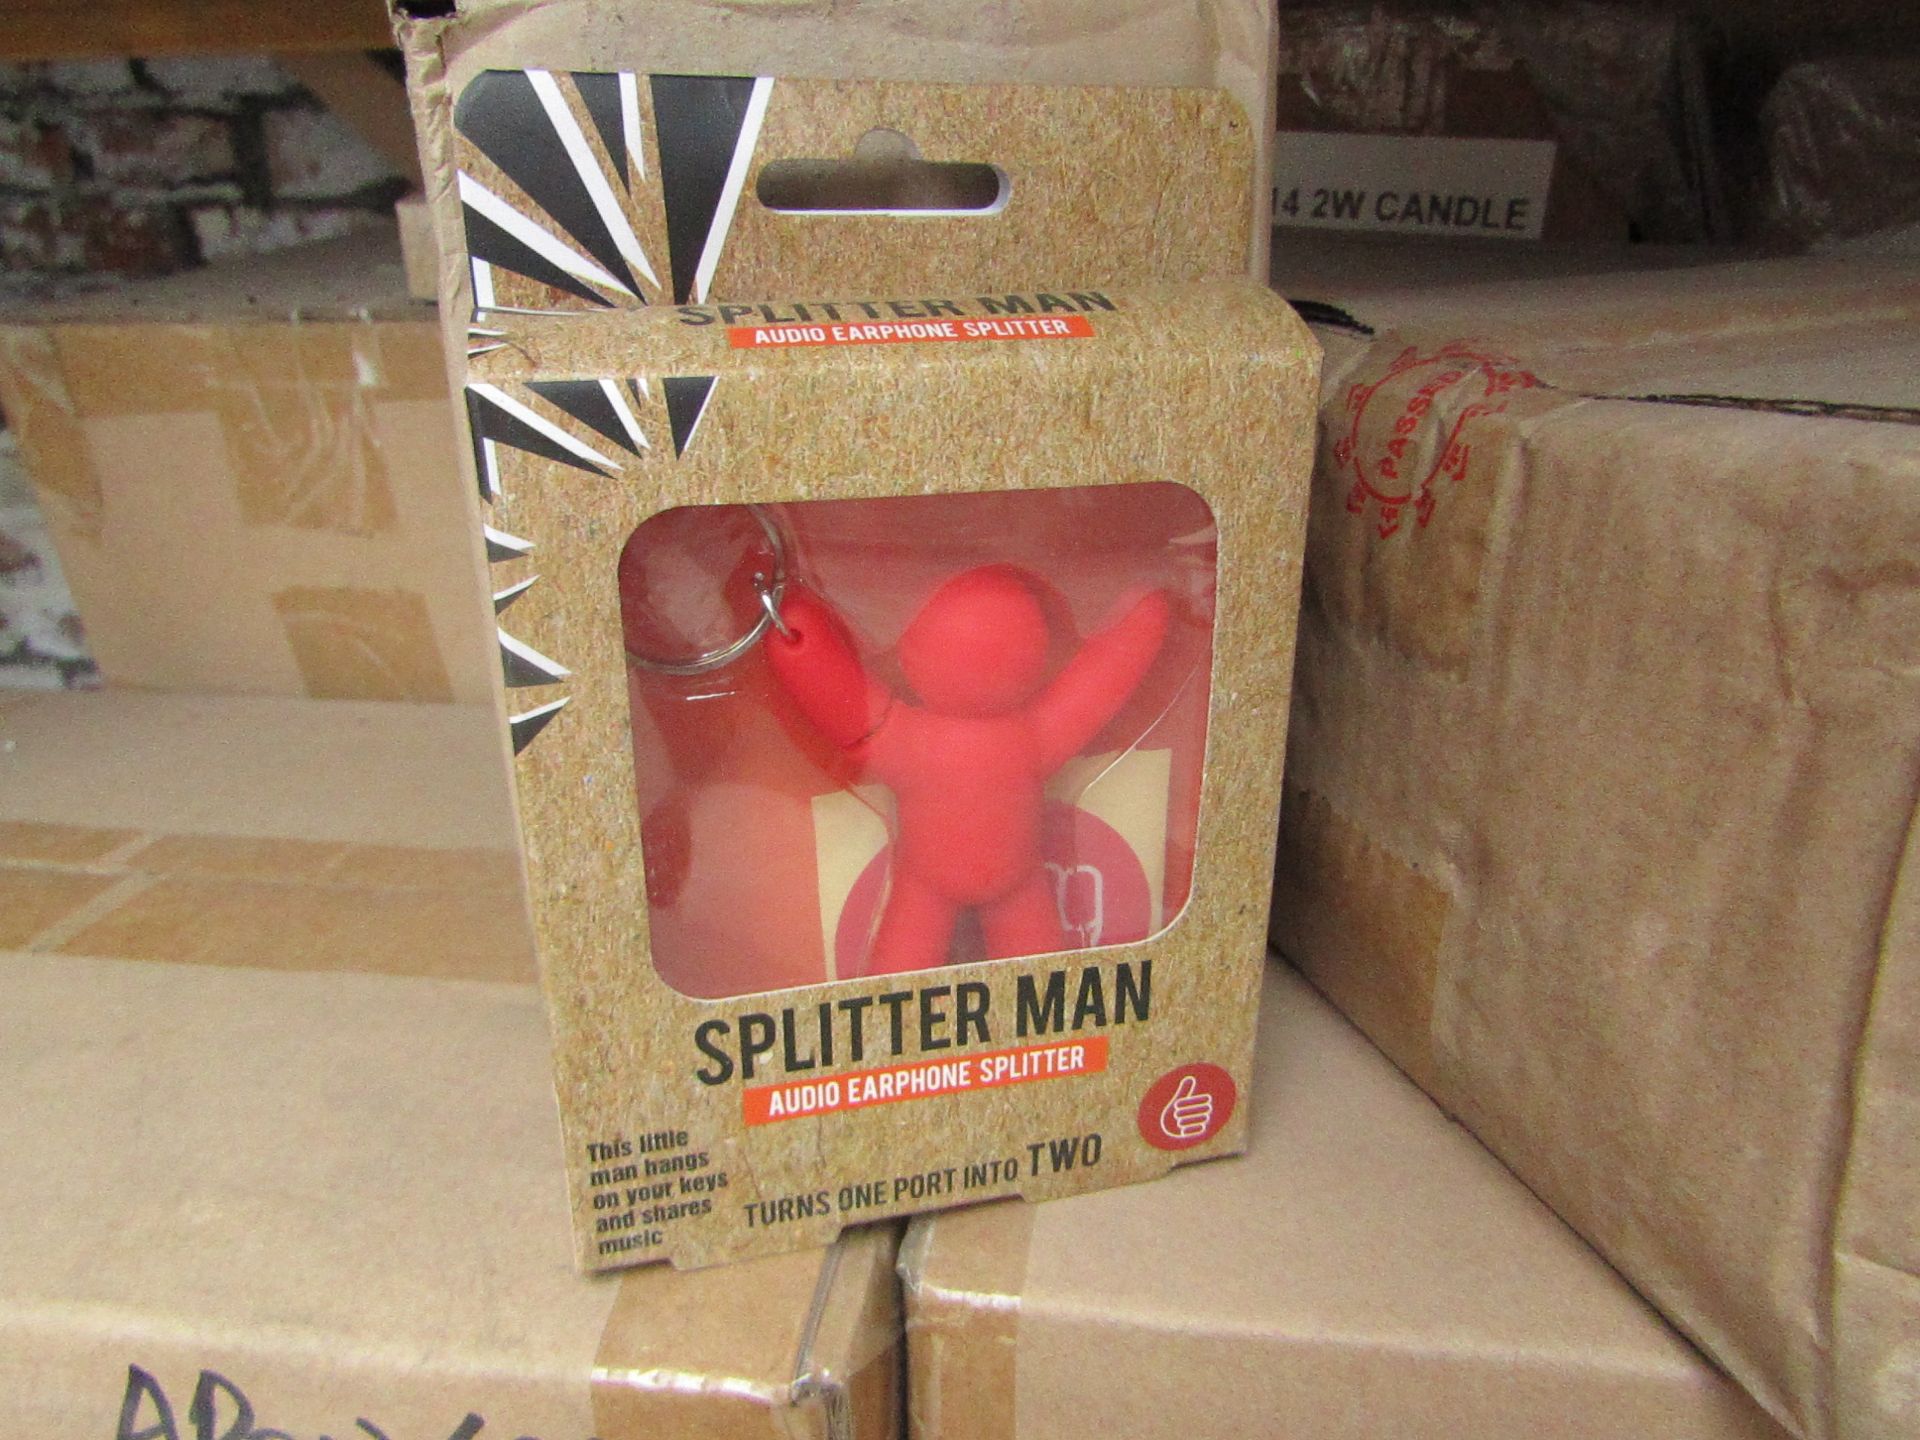 12x Splitter man key rings, allows sound sharing of a device to wired headphones, all new and boxed